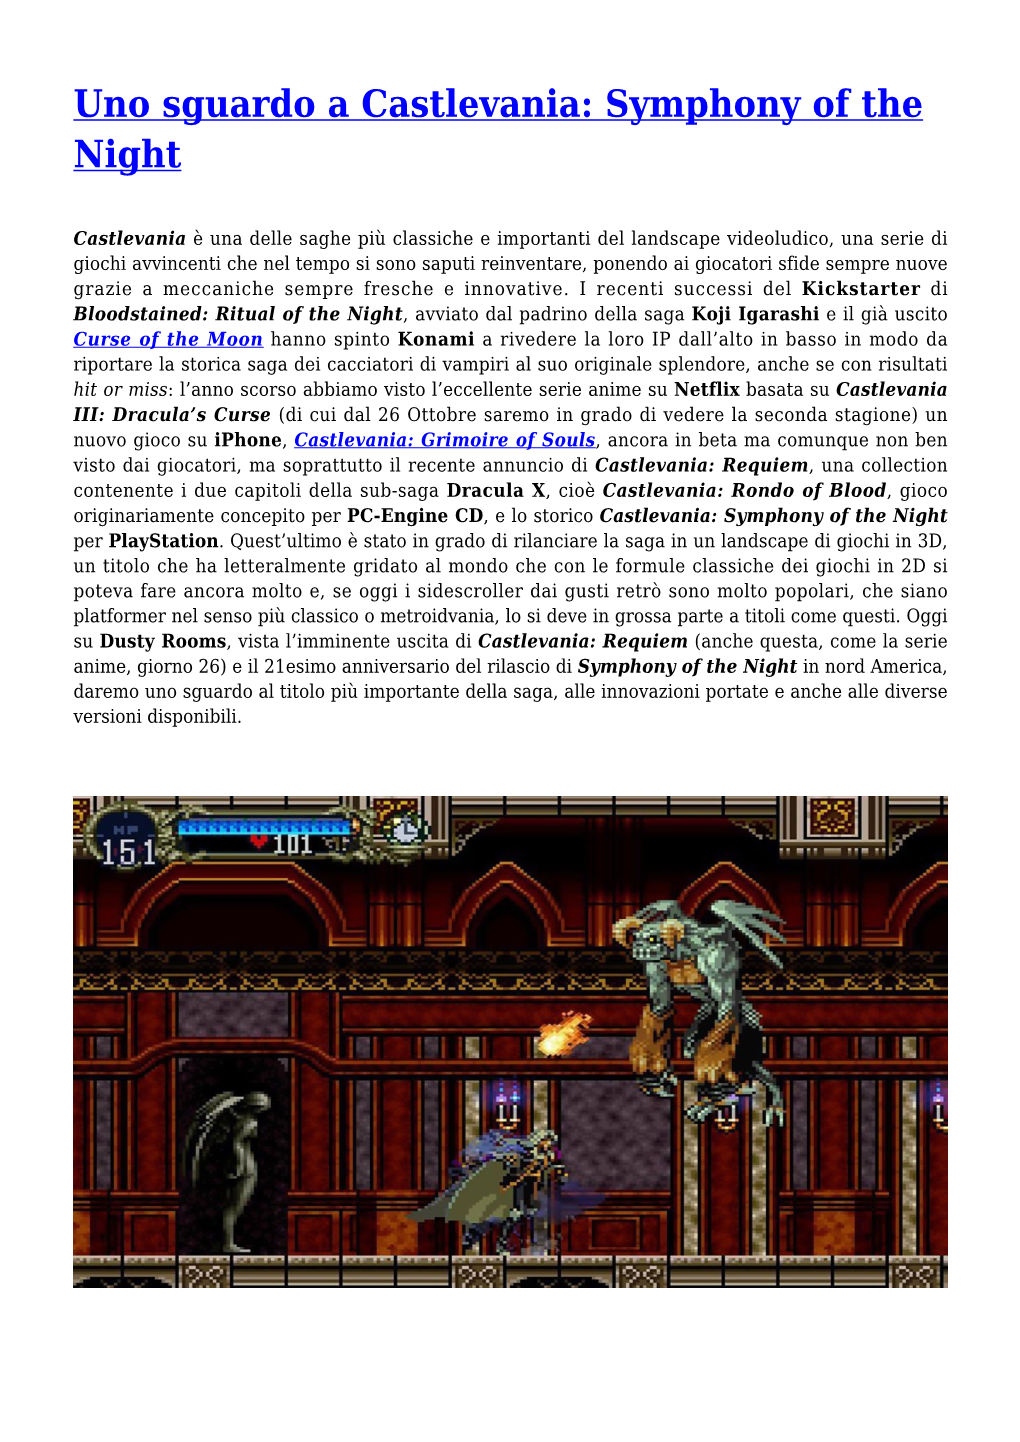 Uno Sguardo a Castlevania: Symphony of the Night,Bloodstained